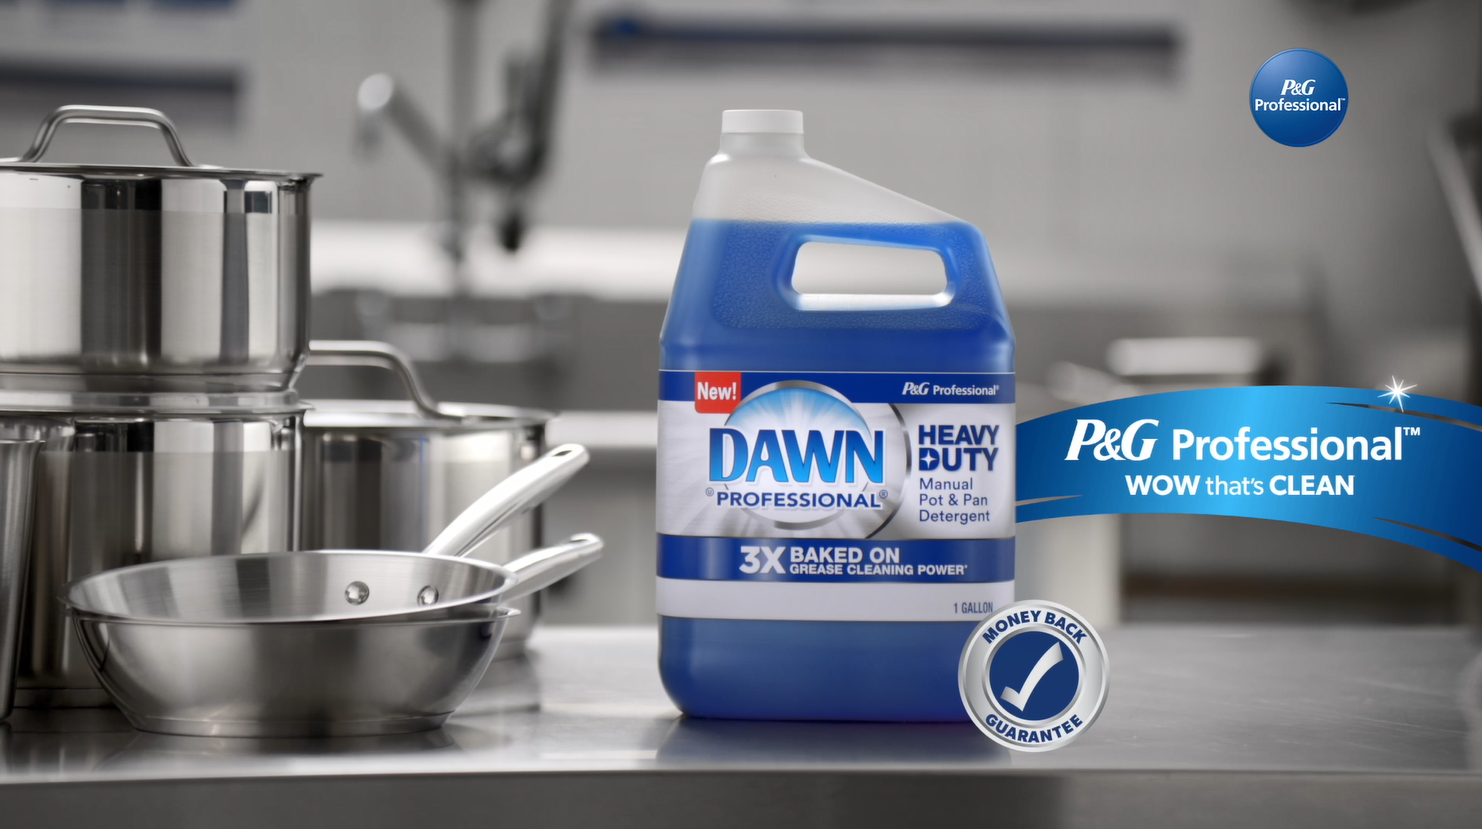 P&G Says Dawn's New Spray Is Best Way to Wash Dishes As-You-Go 12/19/2019